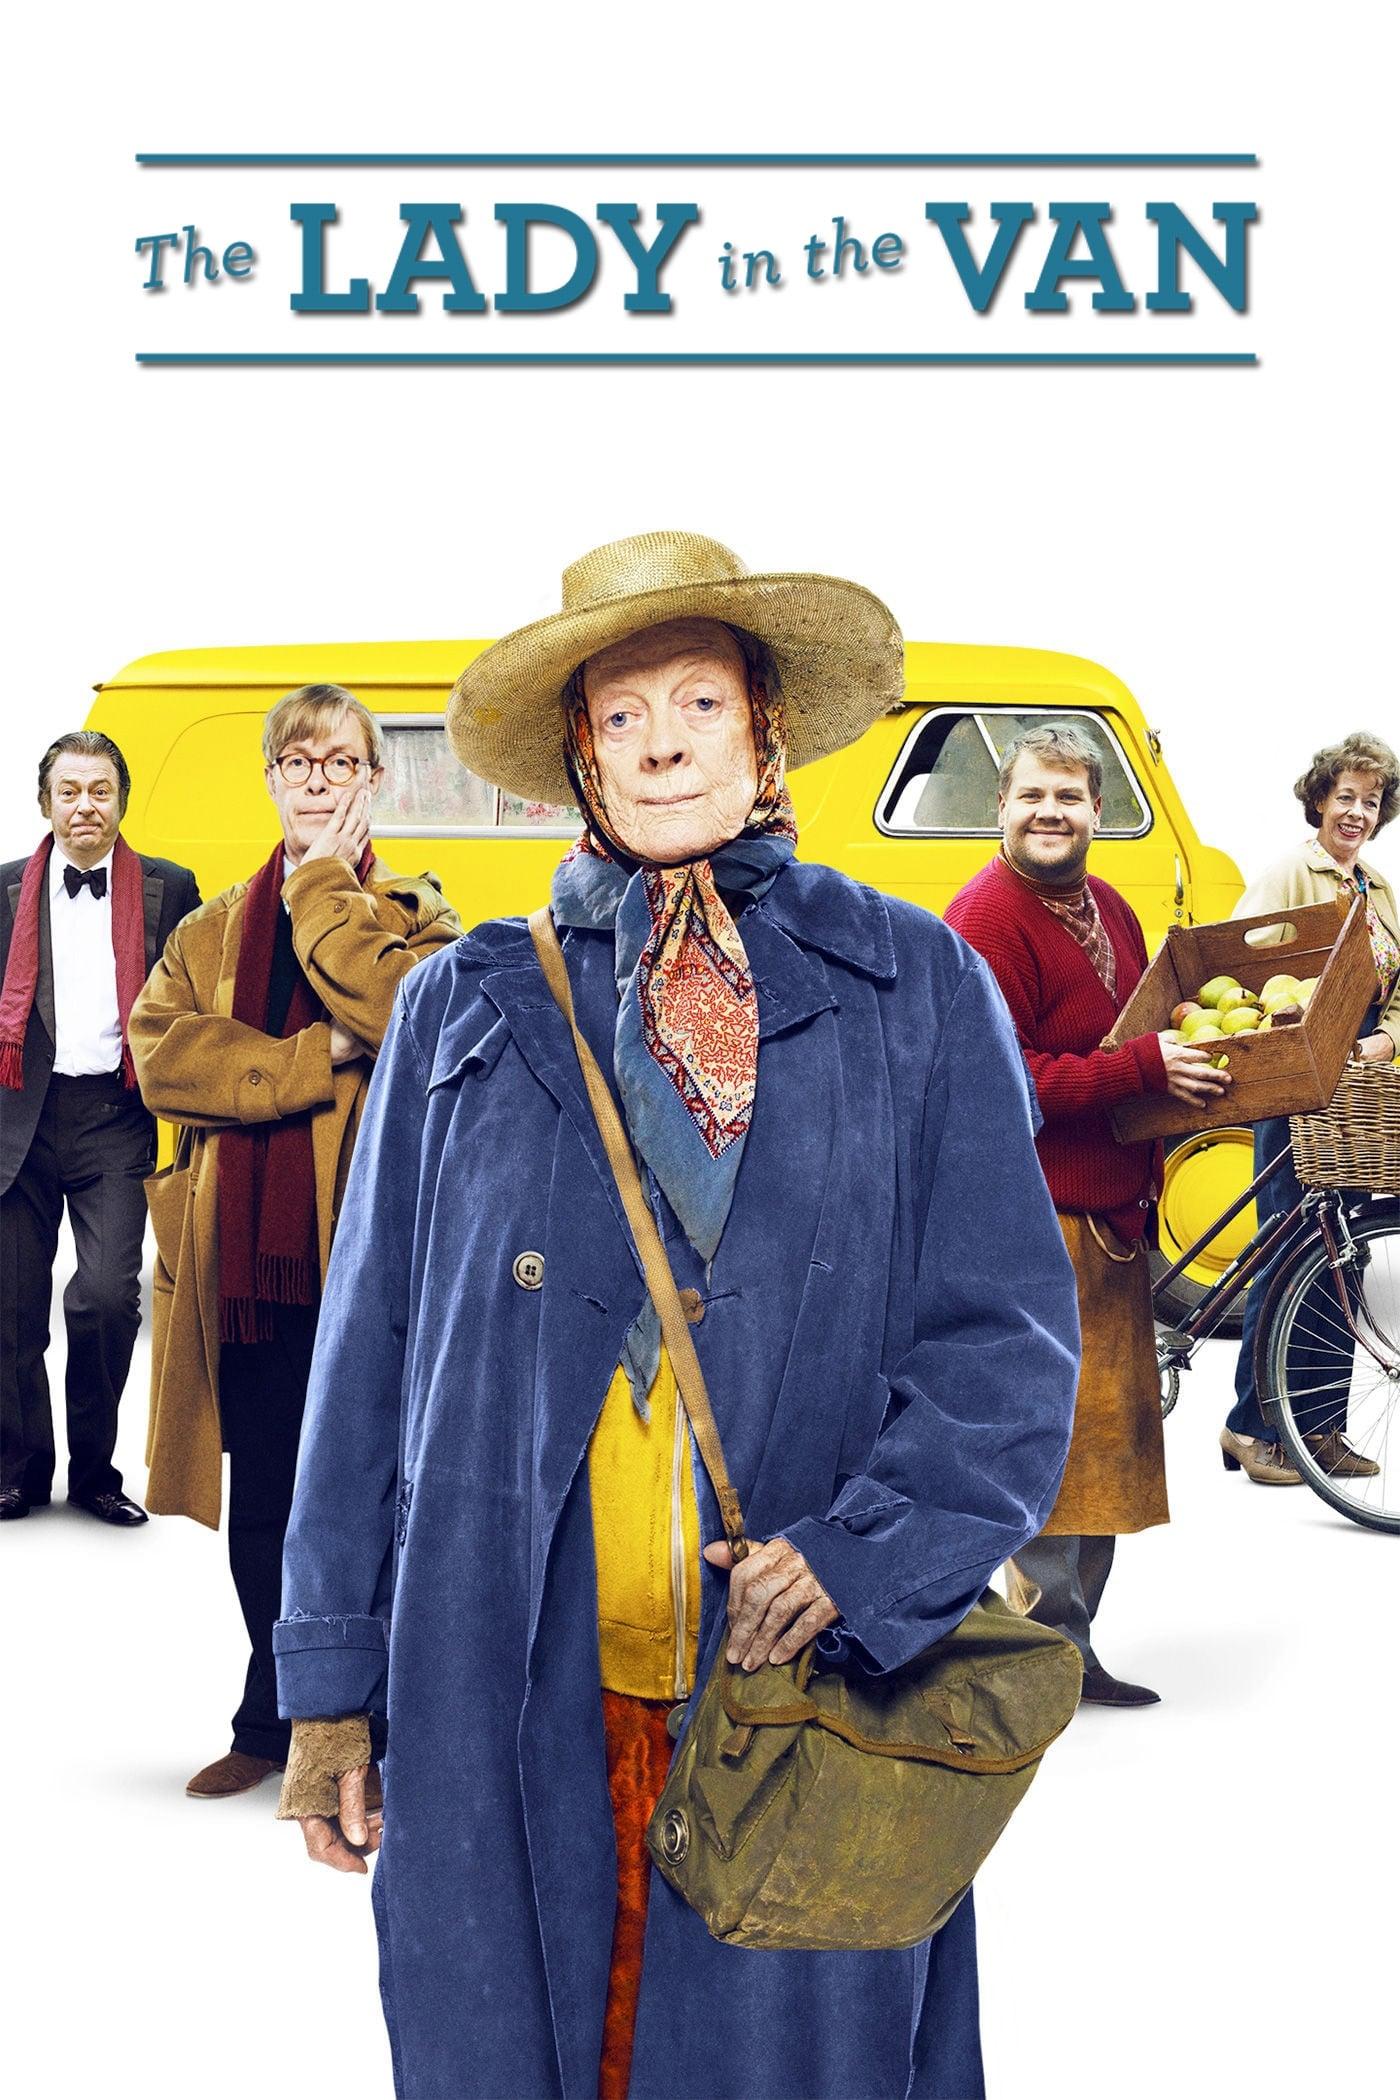 The Lady in the Van poster